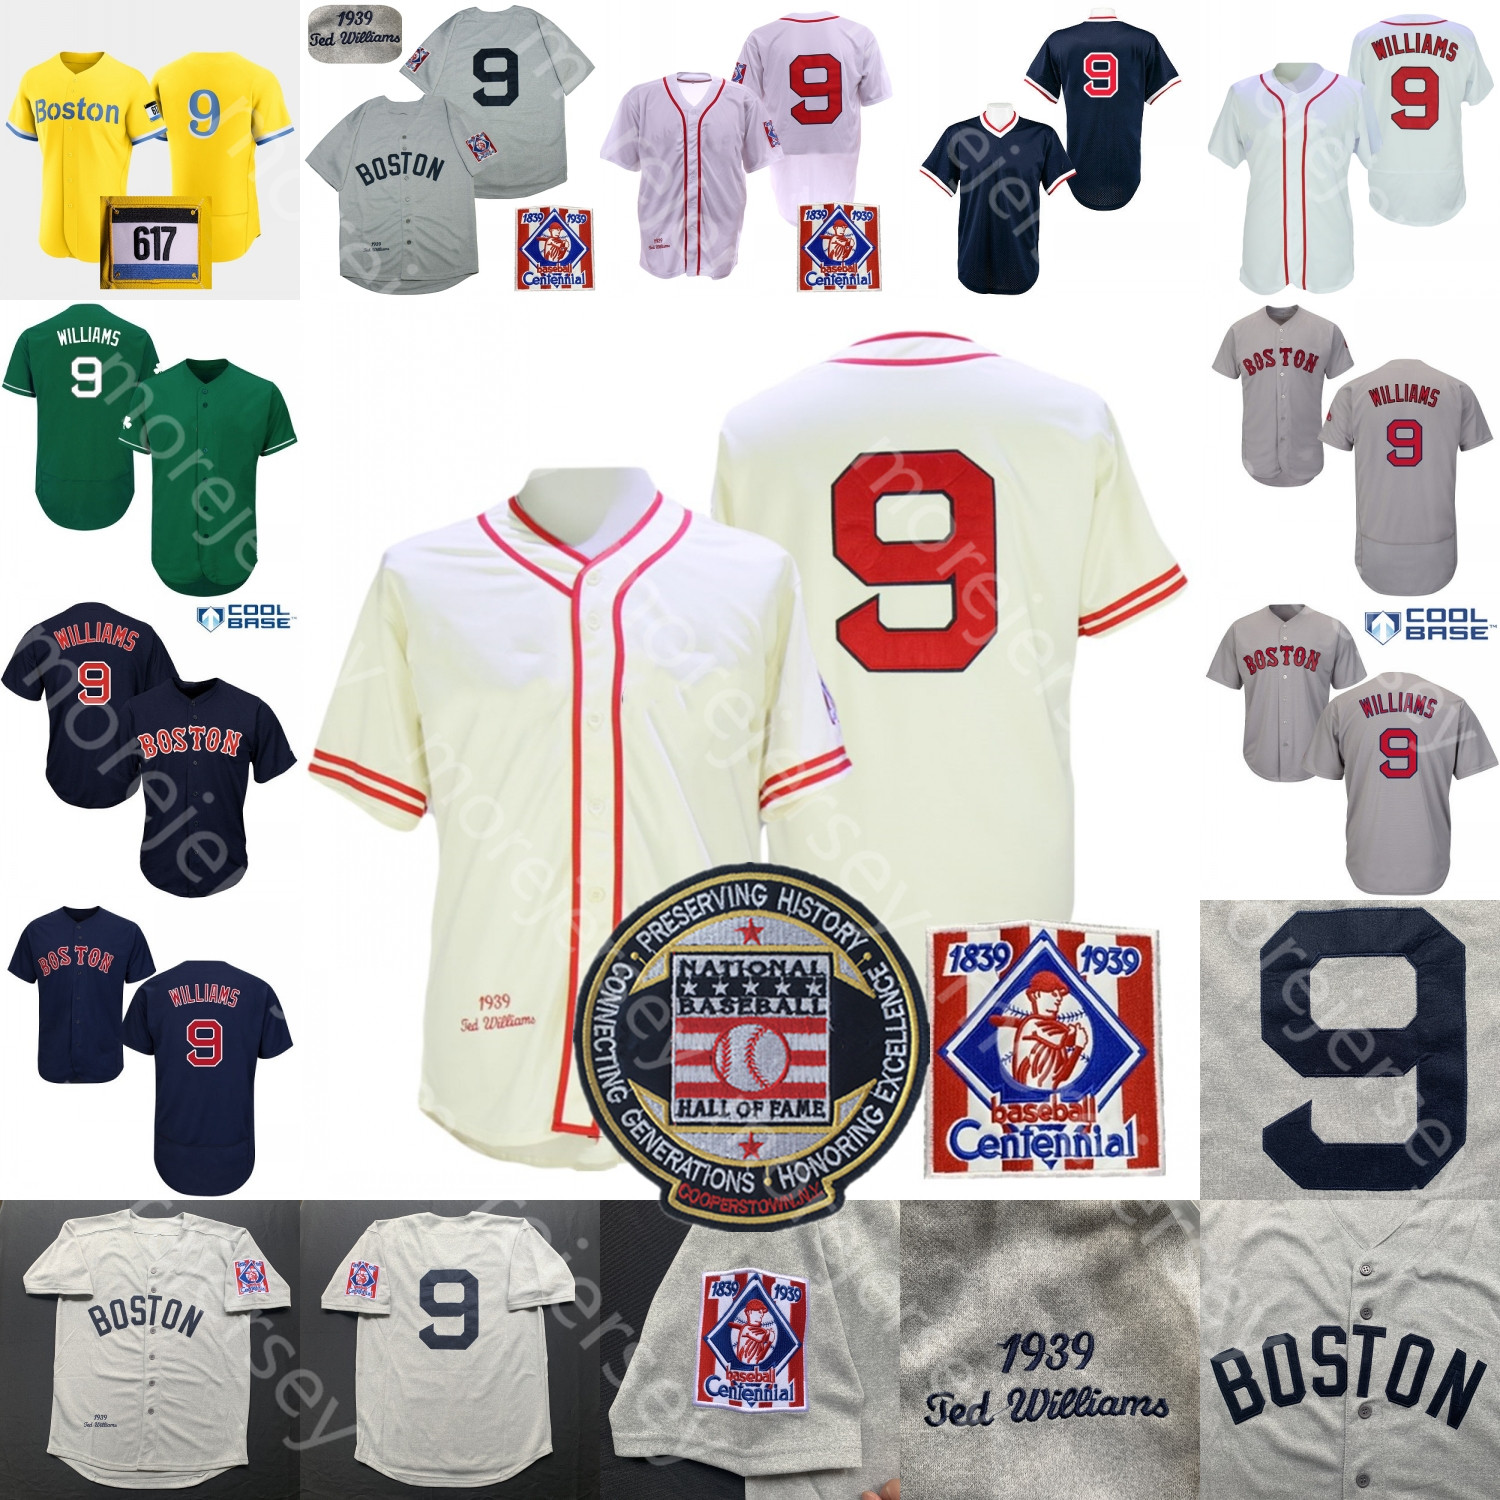 Ted Williams Jersey Hall of Fame Patch 1939 Cream Grey Blanc Cooperstown 2021 City Connect Player Jour Forfait Salute pour Service Gris Navy Red Blanc Ventiliers Vert